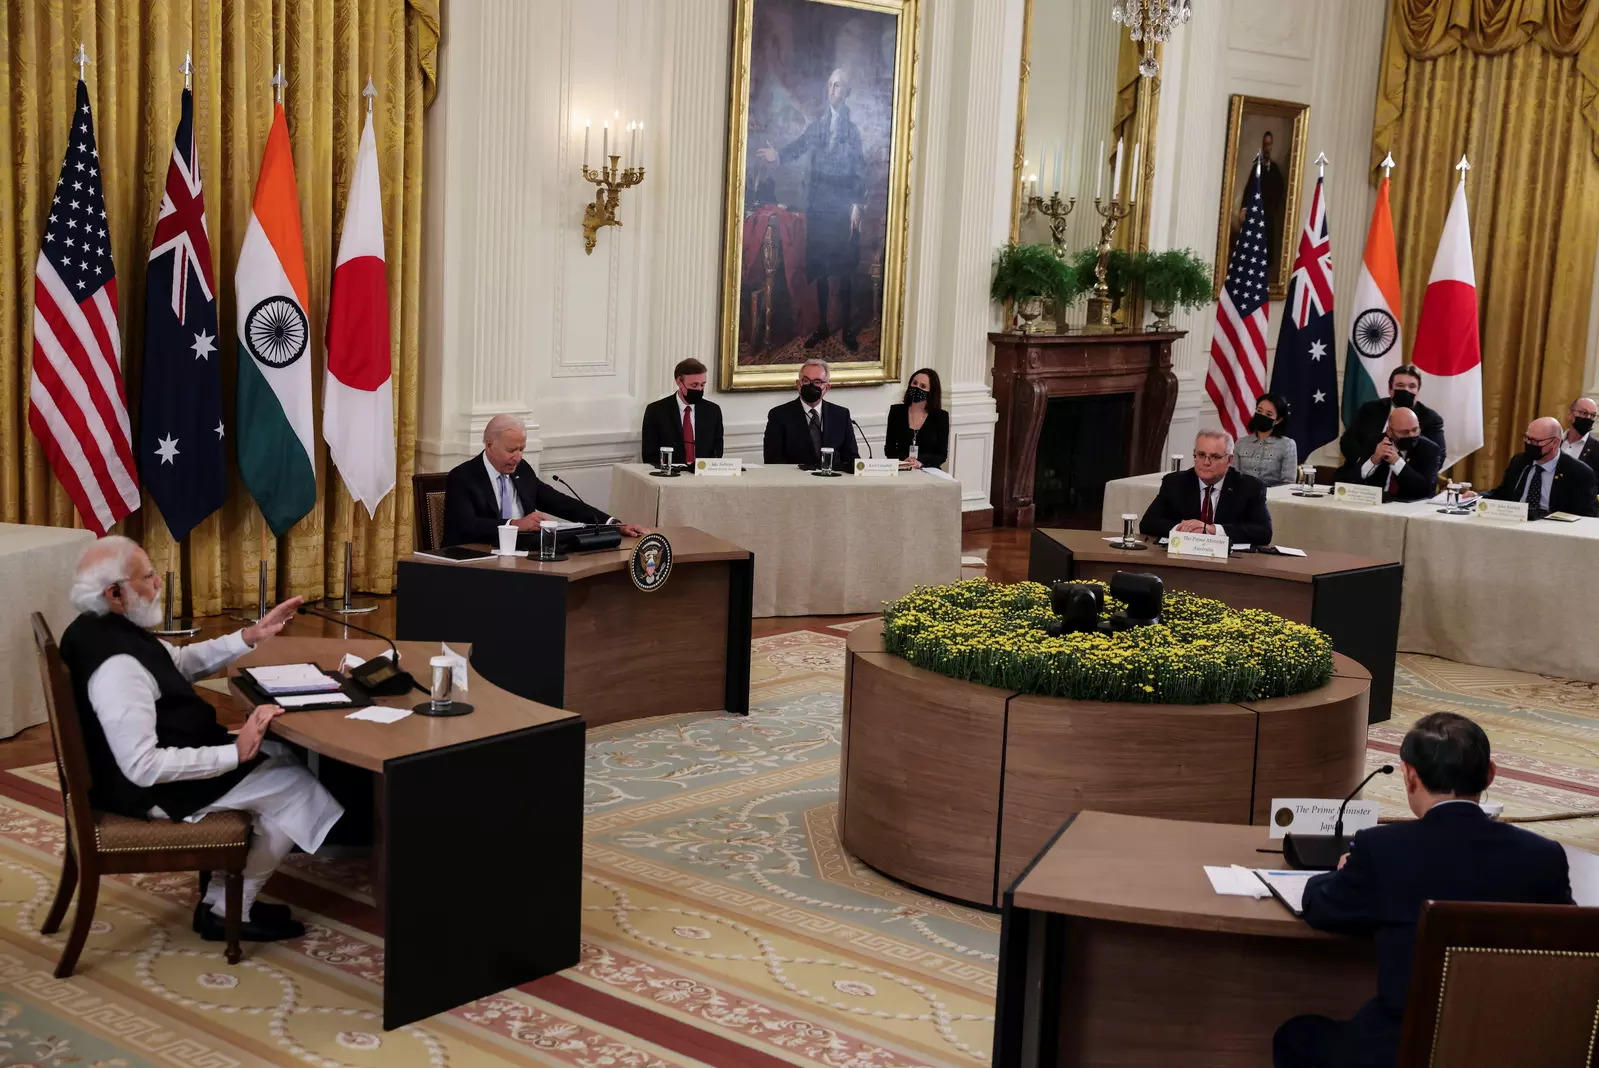 PM Narendra Modi speaks during a 'Quad nations' meeting at the Leaders' Summit of the Quadrilateral Framework hosted by US President Joe Biden with Australia's PM Scott Morrison and Japan's PM Yoshihide Suga in the East Room at the White House in Washington